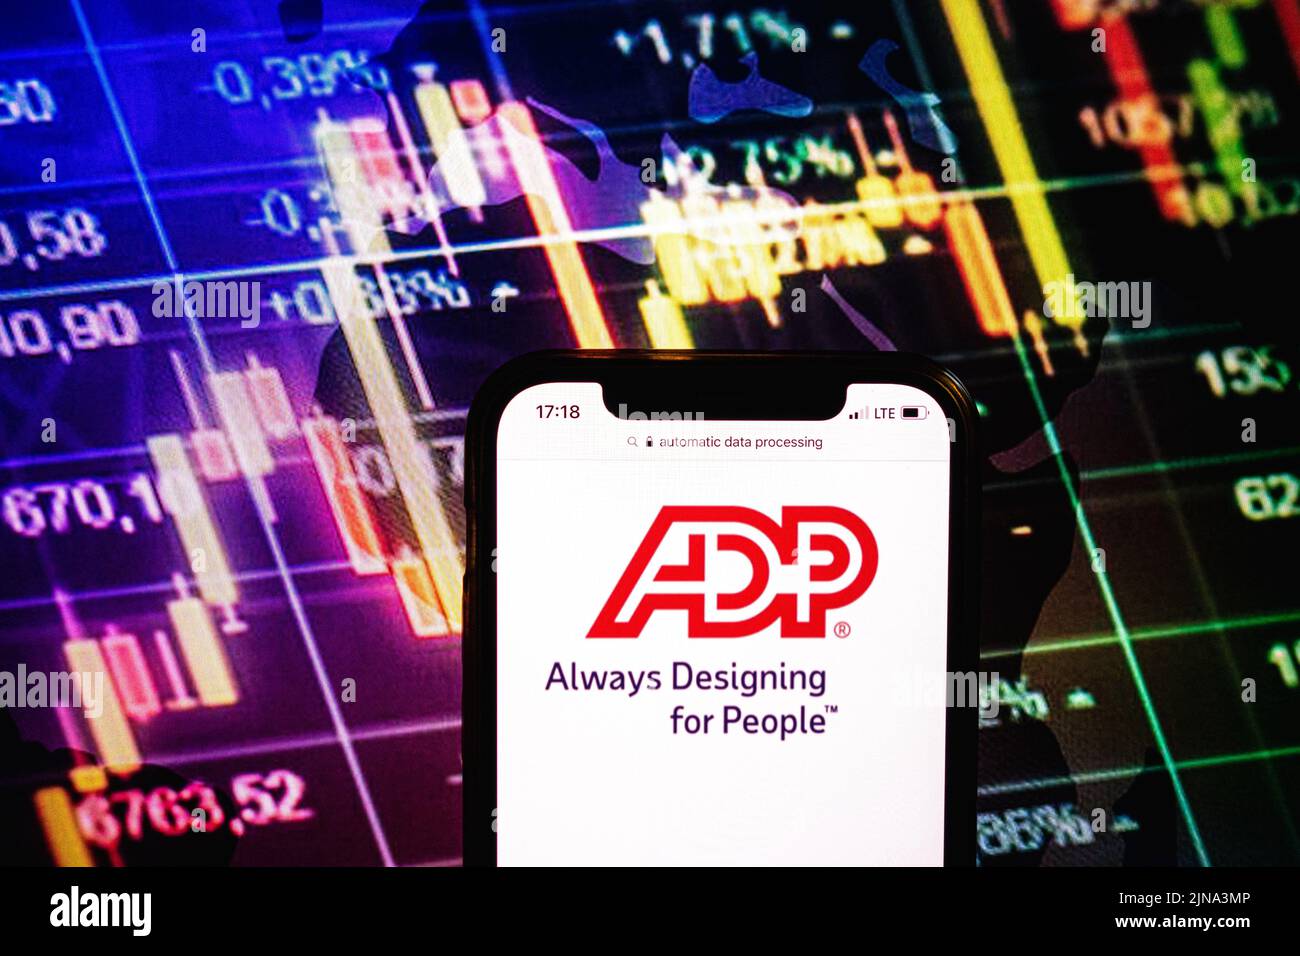 KONSKIE, POLAND - August 09, 2022: Smartphone displaying logo of Automatic Data Processing company on stock exchange diagram background Stock Photo